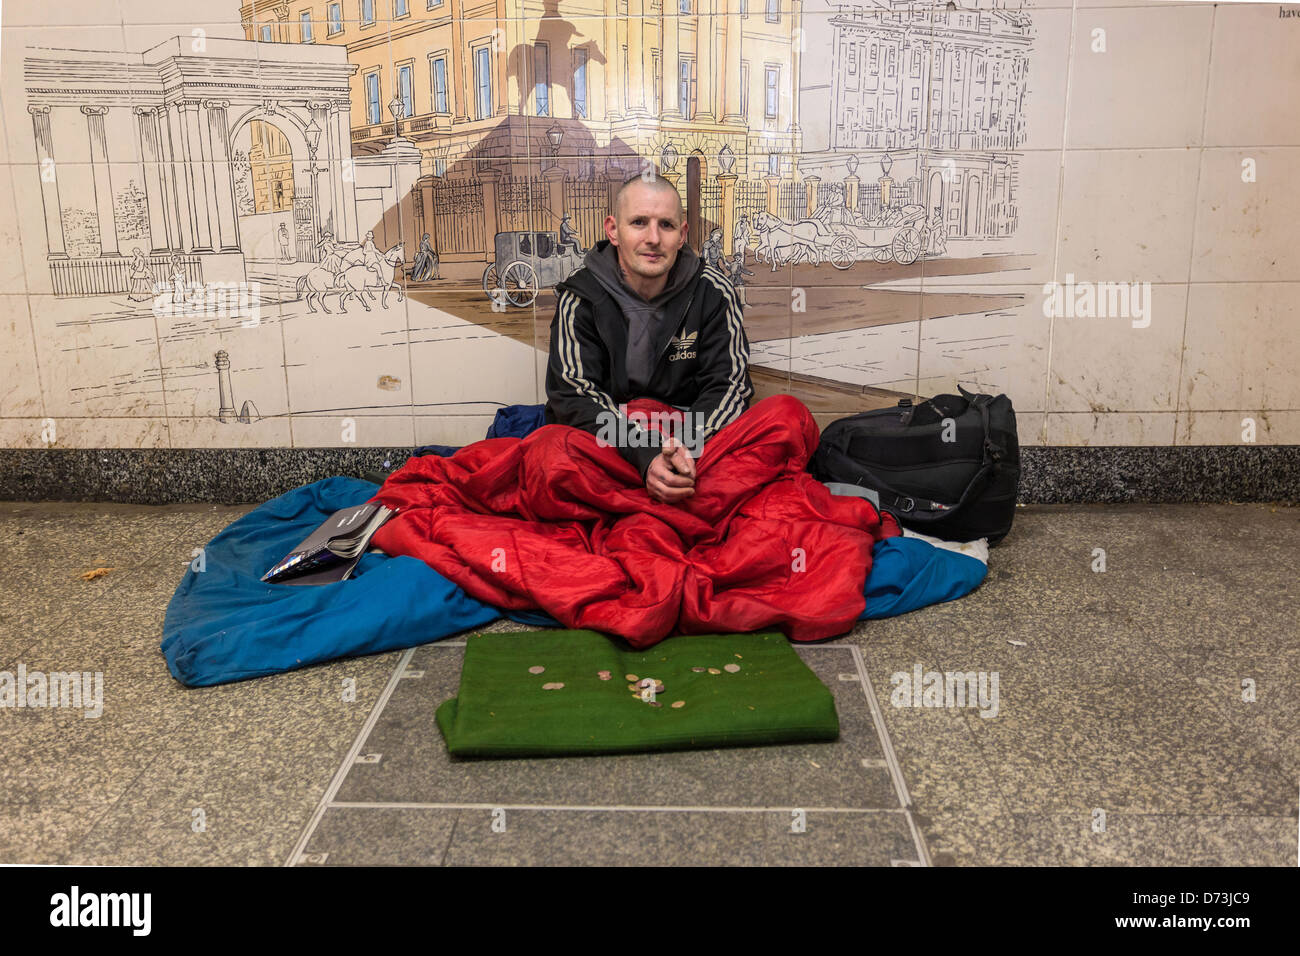 Homeless man begging for money in a dirty underpass, London, England, UK. Stock Photo